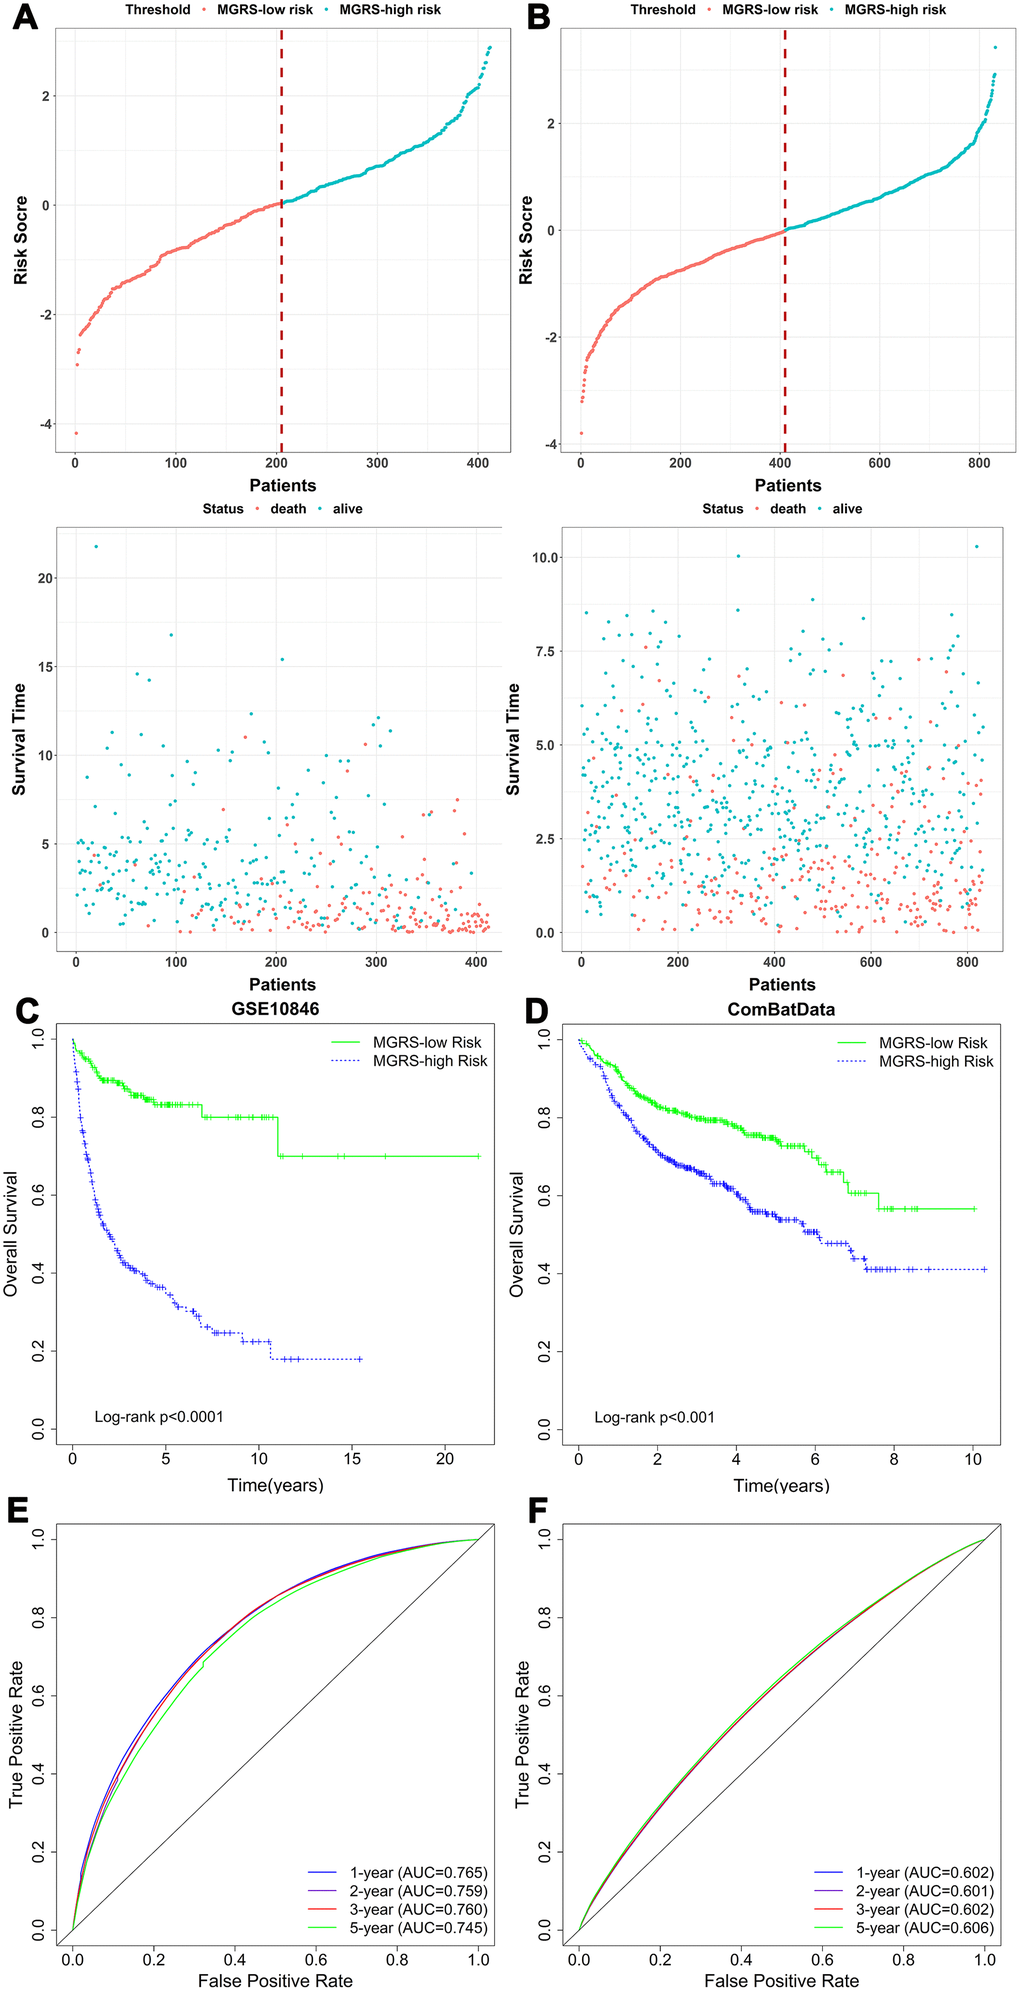 The relationship between multigene risk score (MGRS) and overall survival of patients with DLBCL. Distribution of MGRS and survival status in (A) the training dataset and (B) the validation dataset; (C, D) Kaplan–Meier survival curves of MGRS-high risk and MGRS-low risk groups in the training and validation datasets; (E, F) Time-dependent ROC curves at 1, 2, 3, and 5 years after diagnosis for the MGRS in the training and validation datasets.